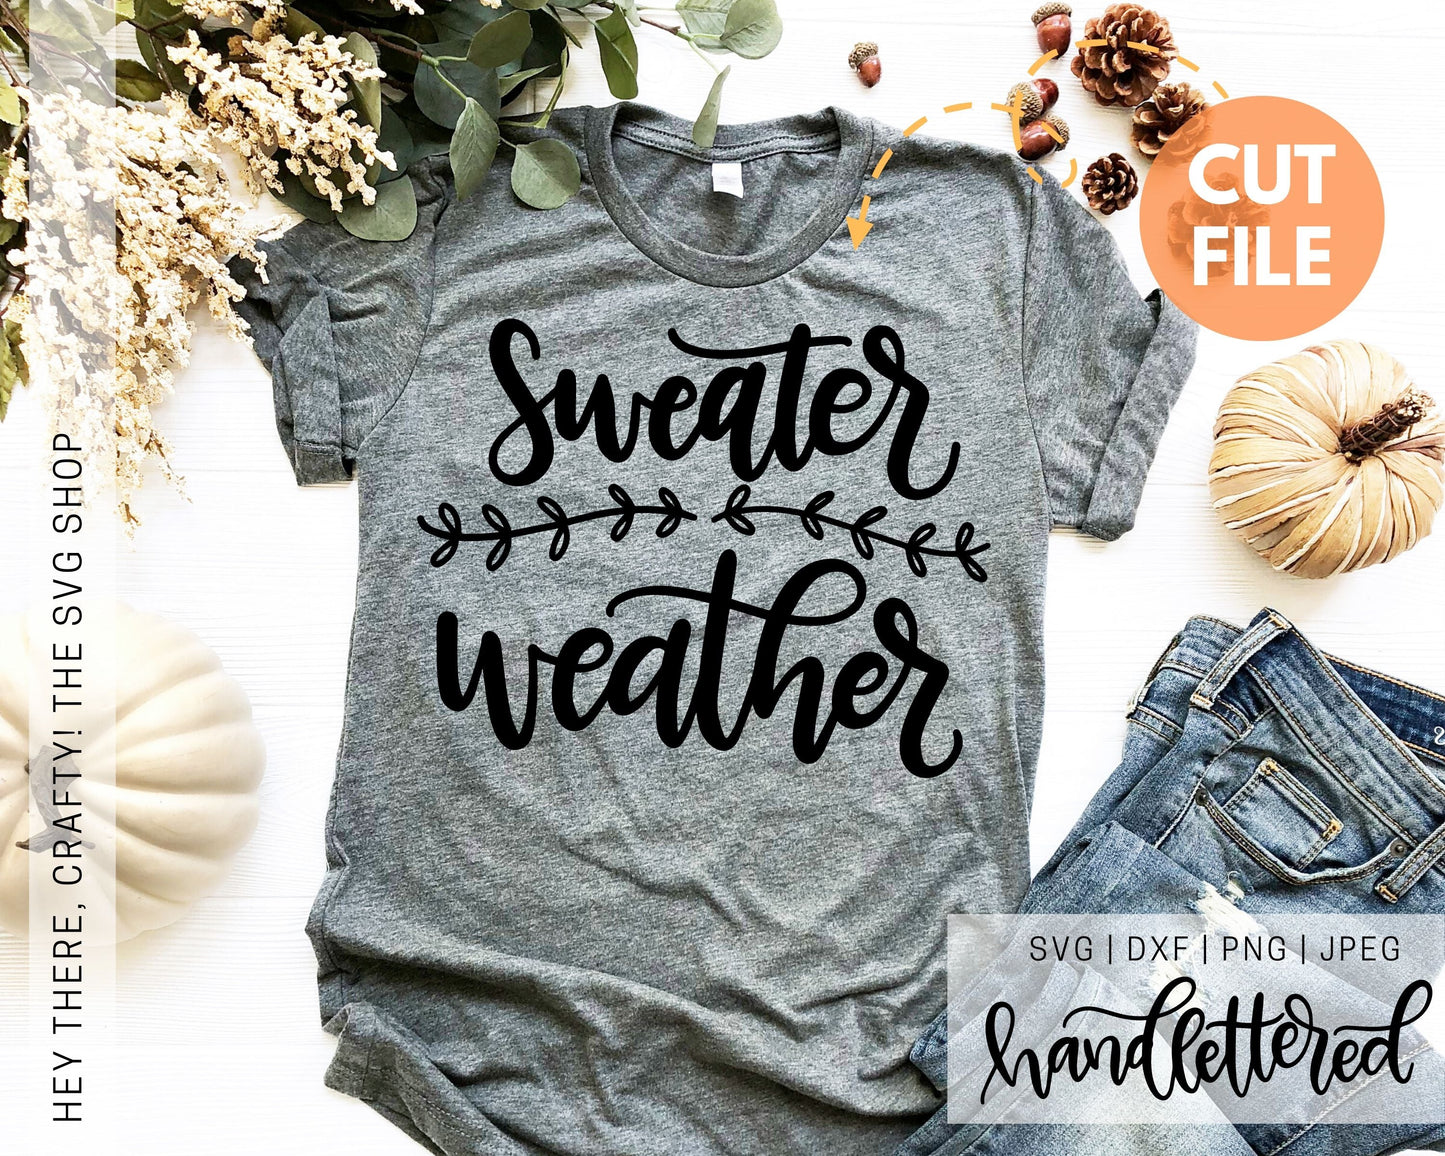 Sweater Weather | SVG, PNG, DXF, JPEG